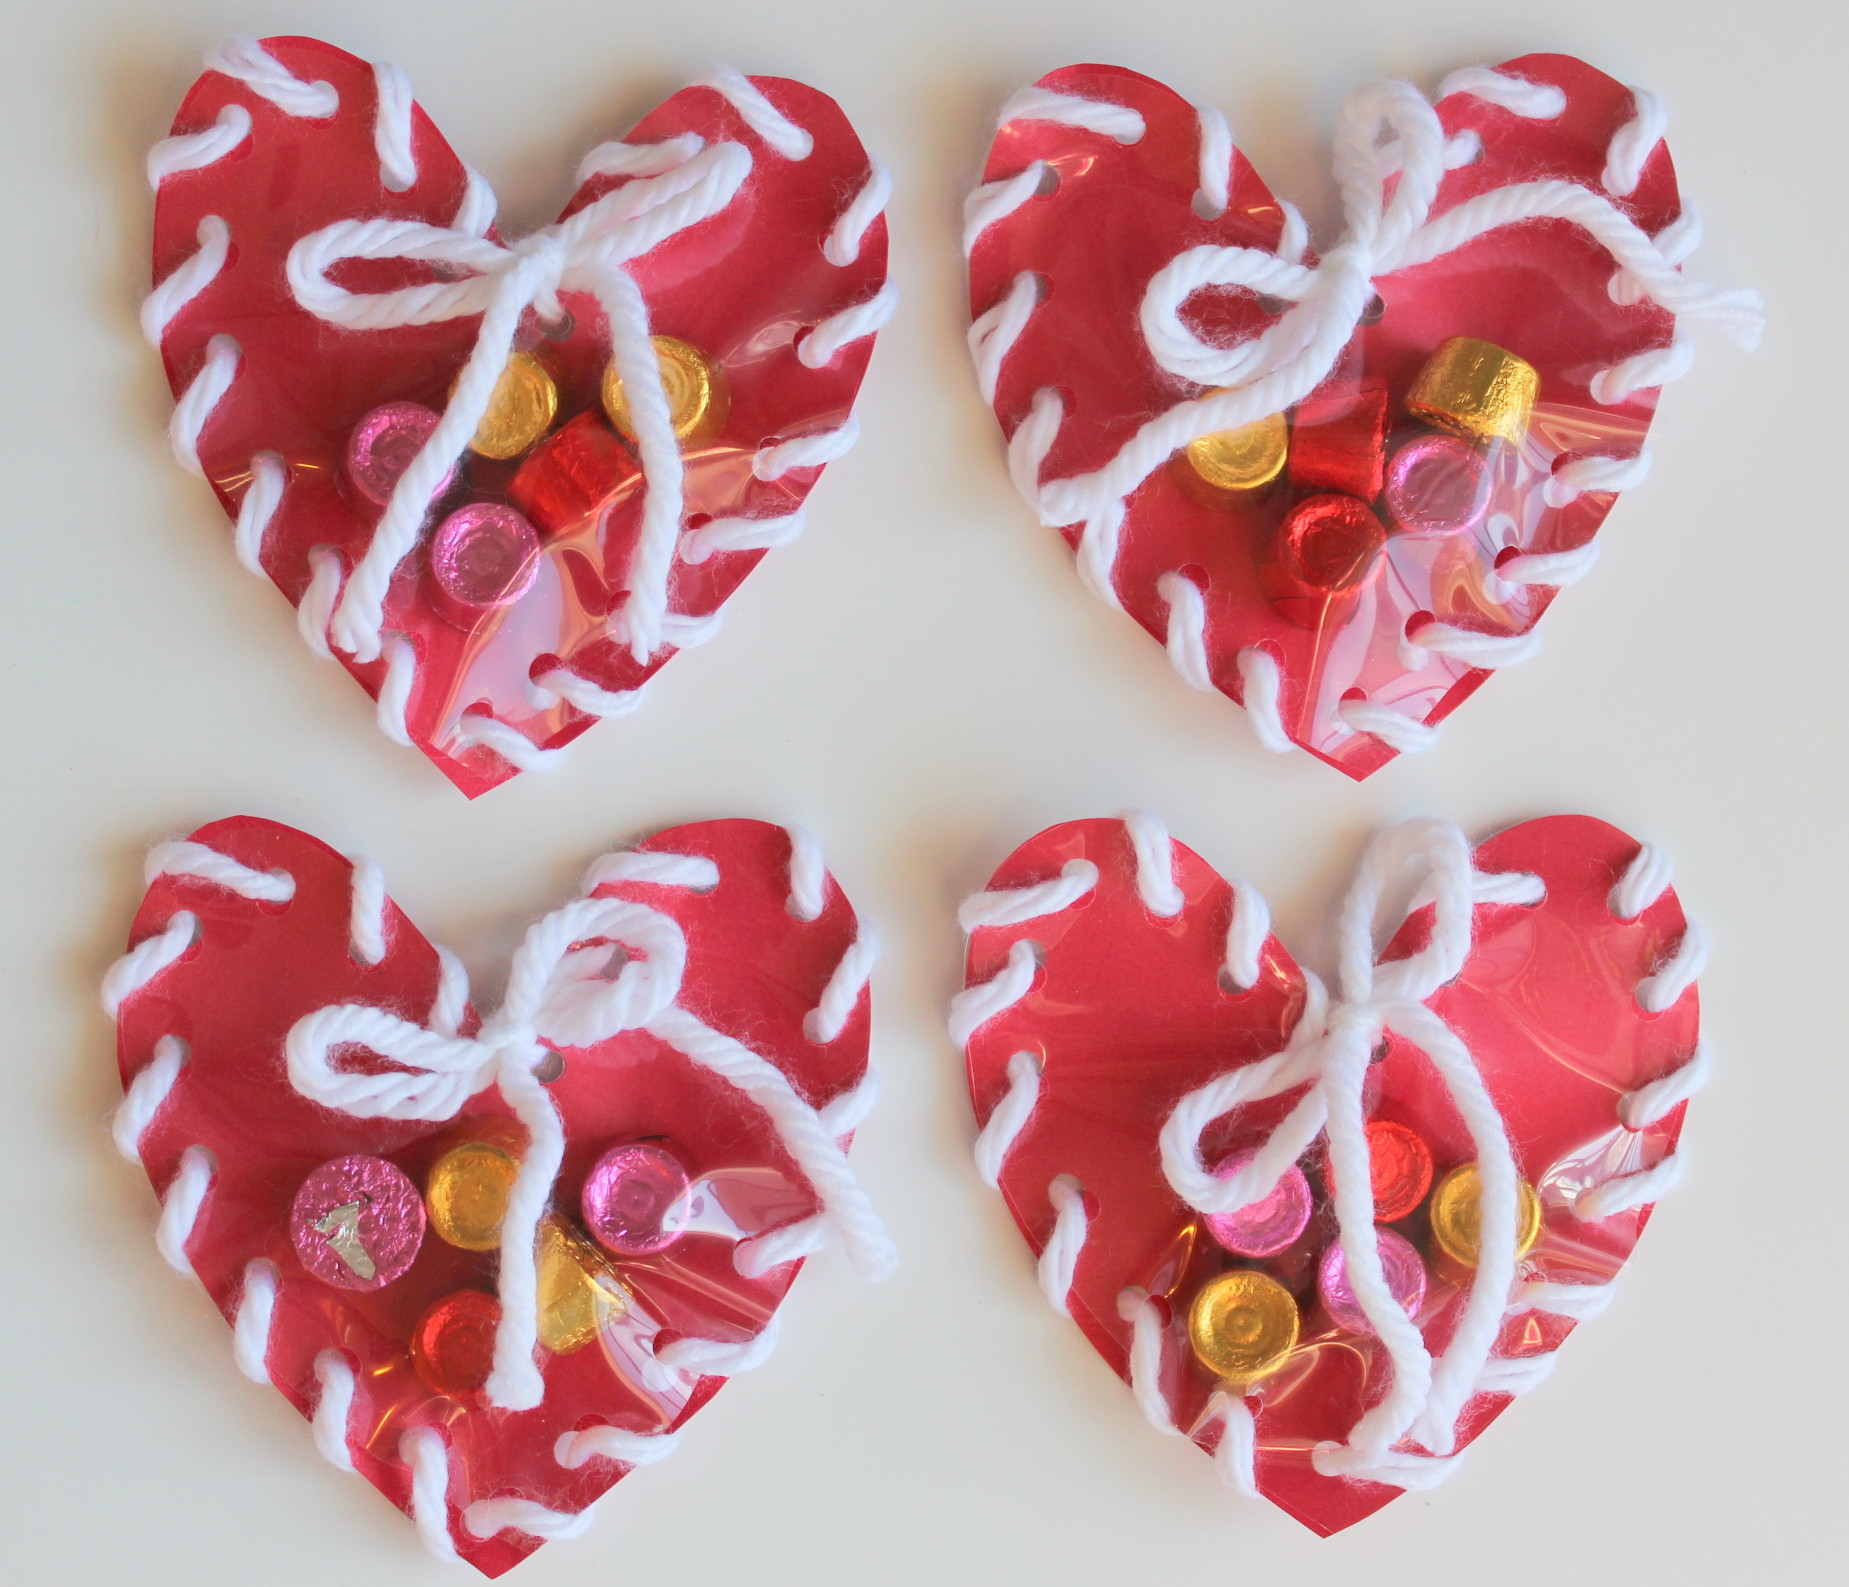 Valentine Crafts Ideas For Toddlers
 Lollydot Hand Sewn Paper Heart Valentine Craft for Kids